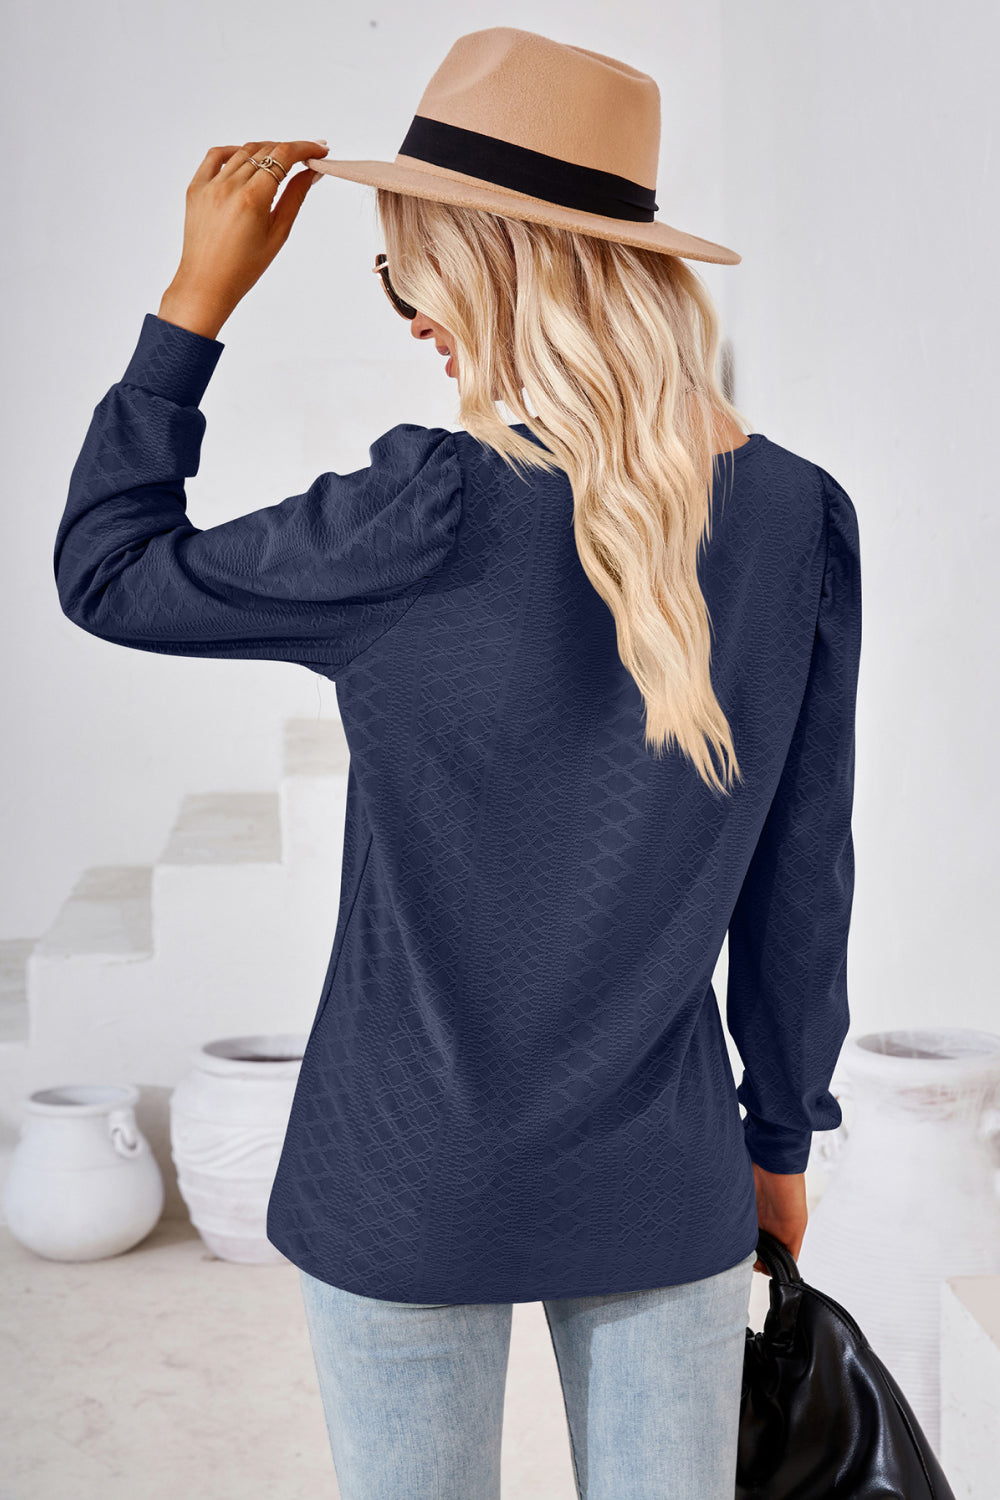 Square Neck Puff Sleeve Blouse - Women’s Clothing & Accessories - Shirts & Tops - 8 - 2024